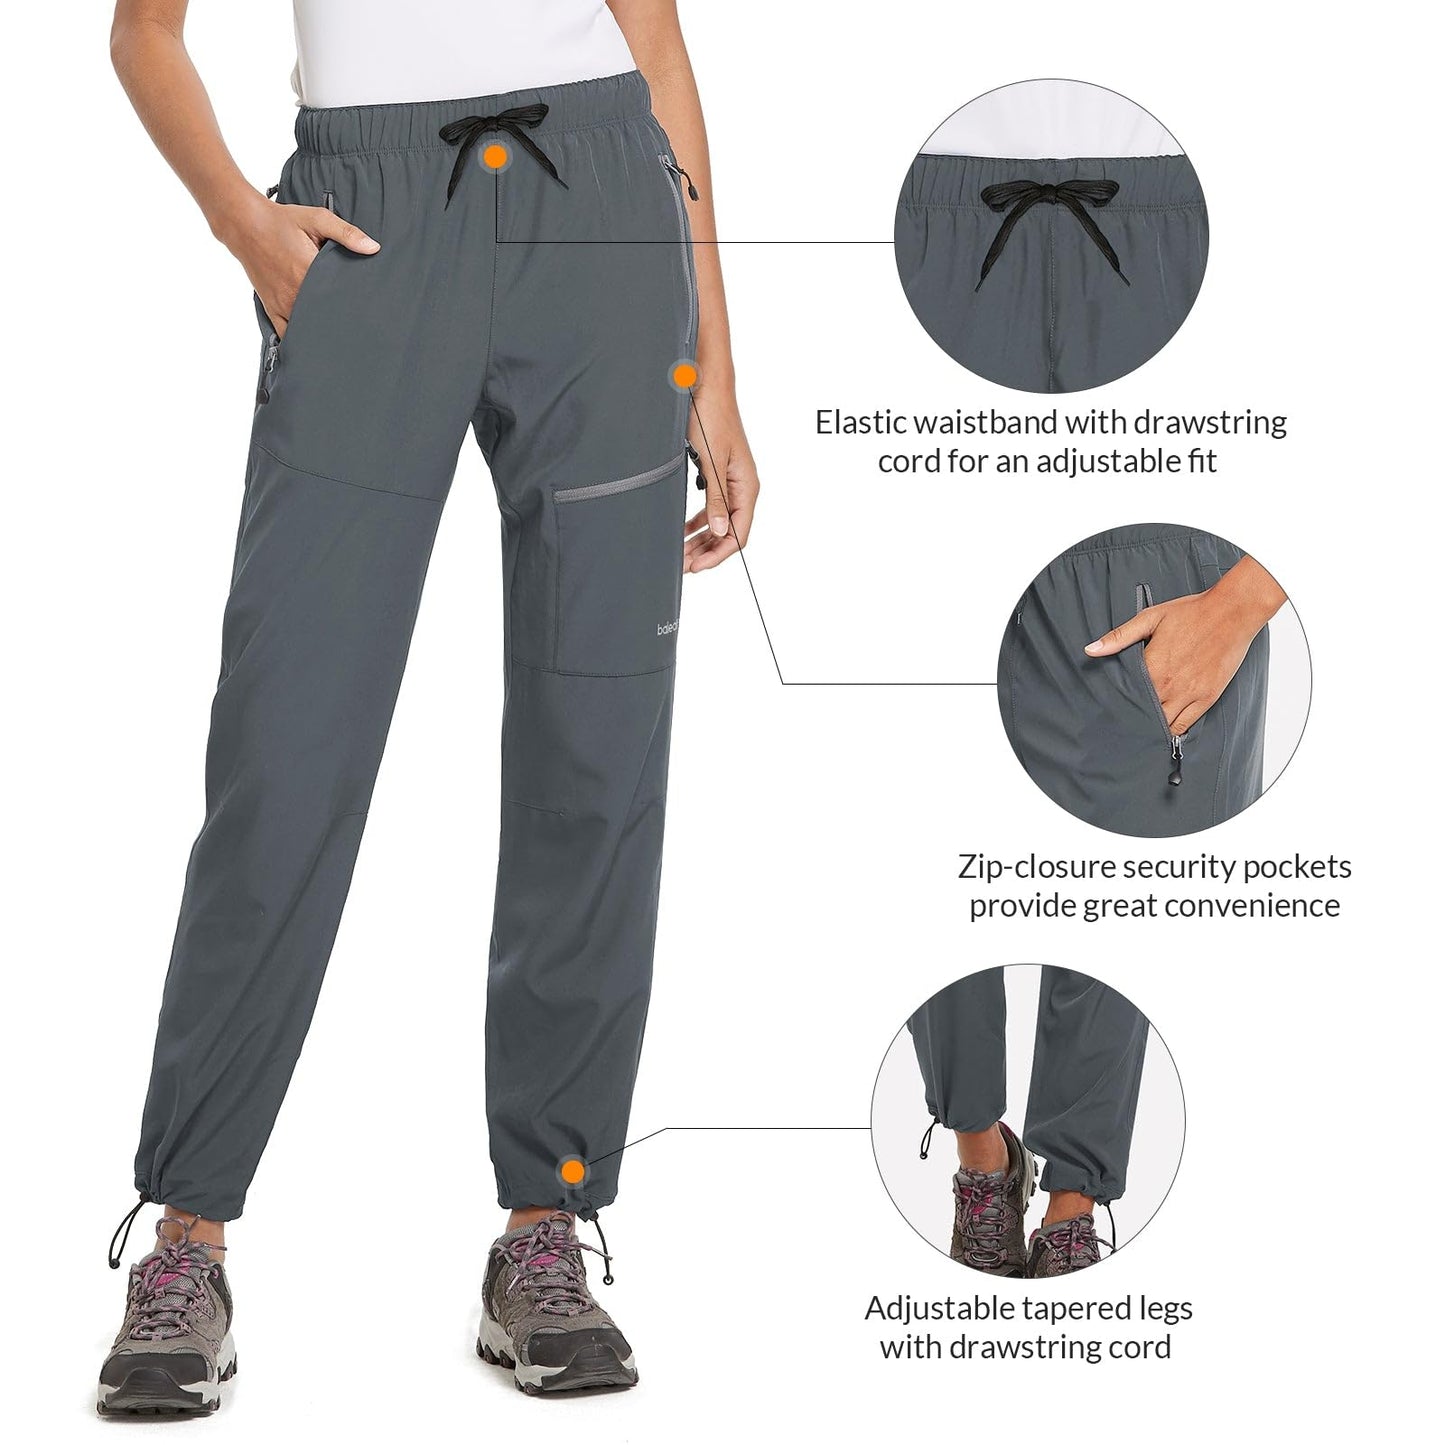 BALEAF Women's Hiking Pants Quick Dry Water Resistant Lightweight Joggers Pant for All Seasons Elastic Waist Deep Gray Size M